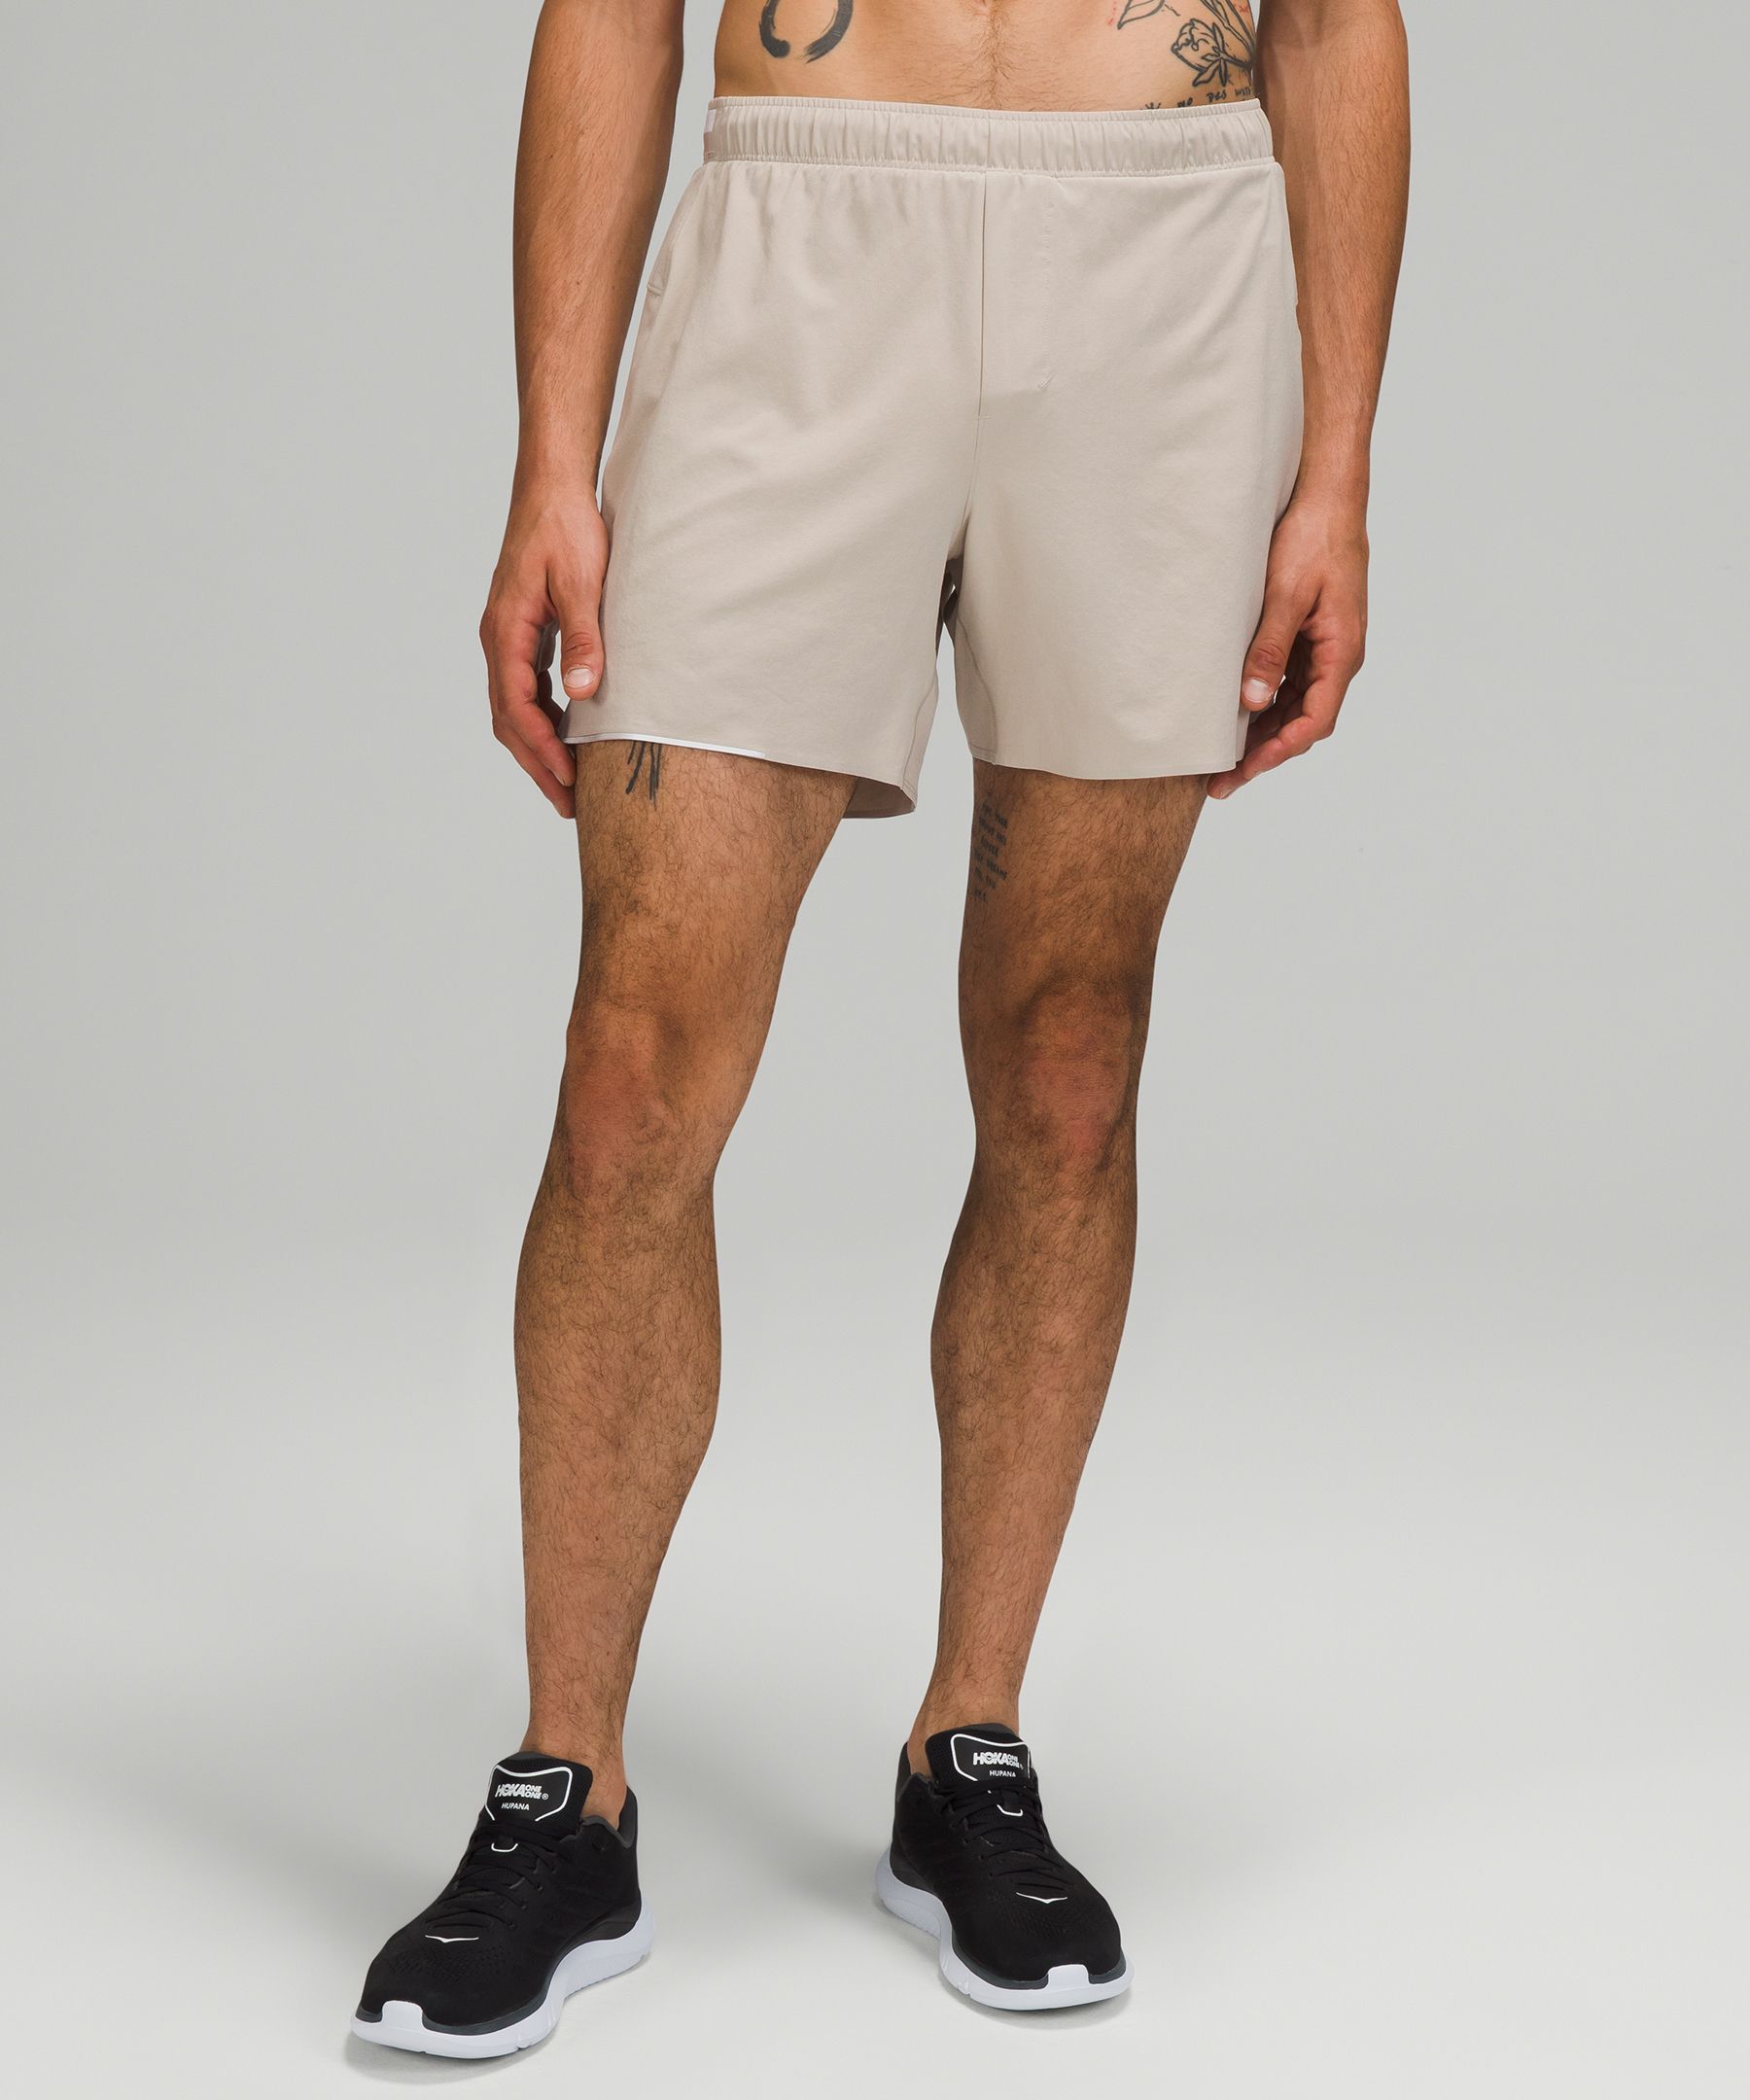 Lululemon Surge Lined Short 6 – For The People